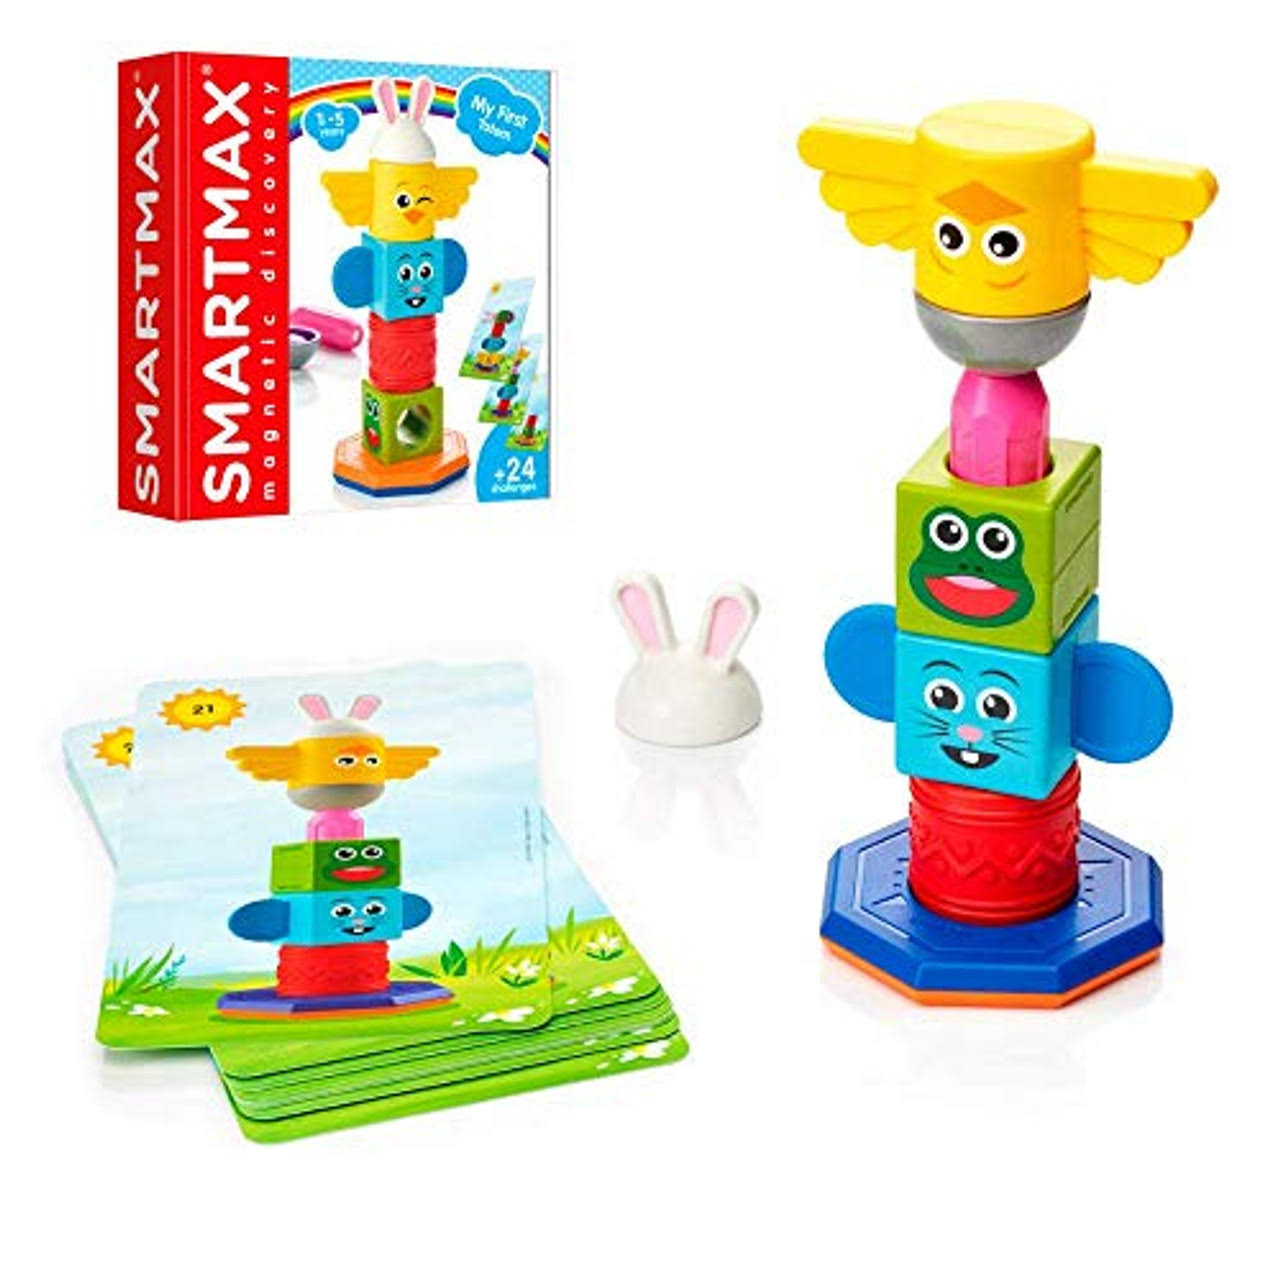 SmartMax My First Totem Stem Magnetic Discovery Building Game with Tac